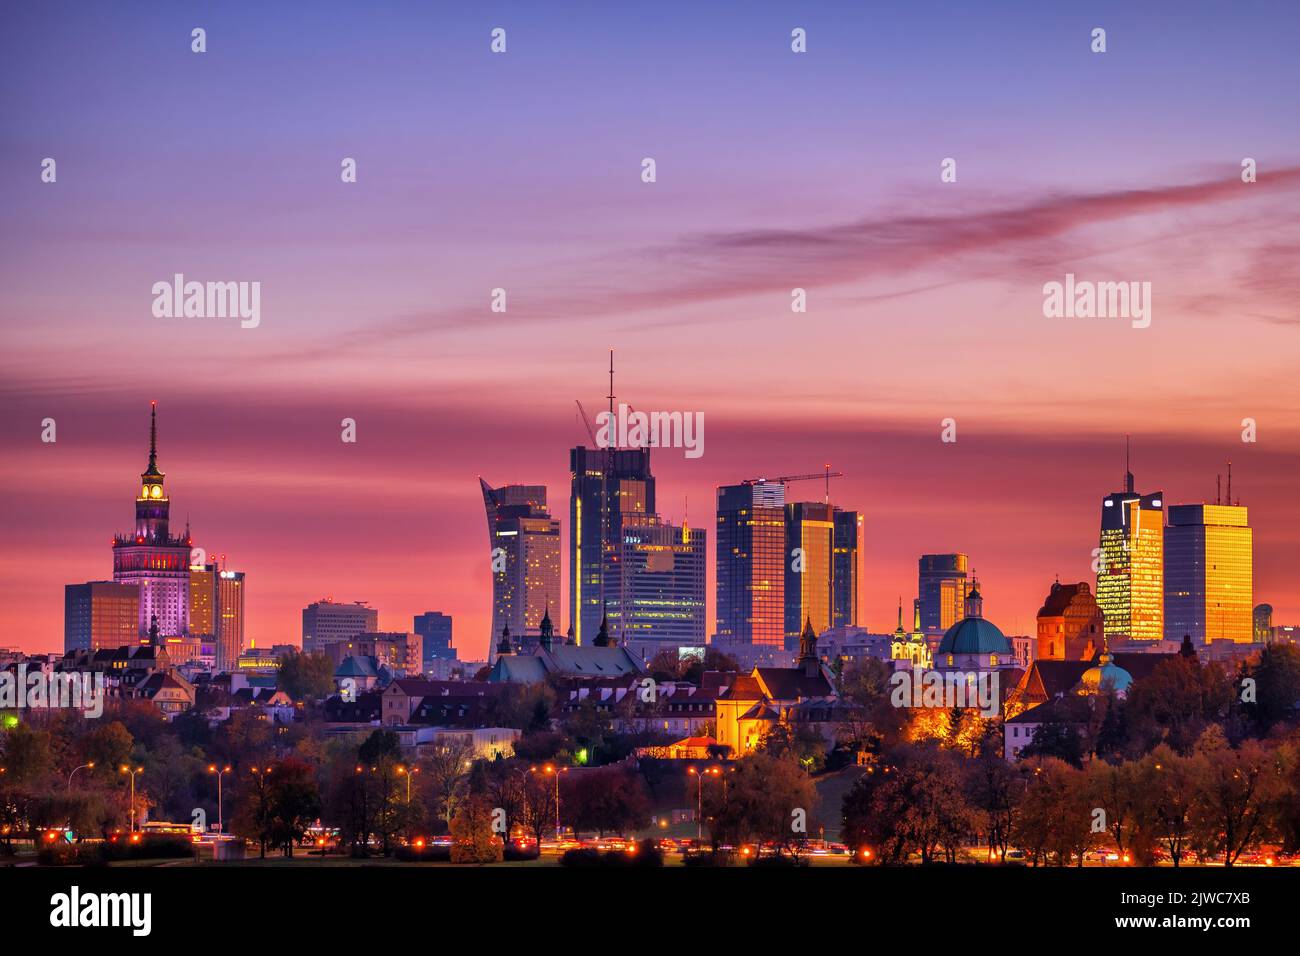 City downtown skyline of Warsaw at twilight, capital of Poland. Stock Photo